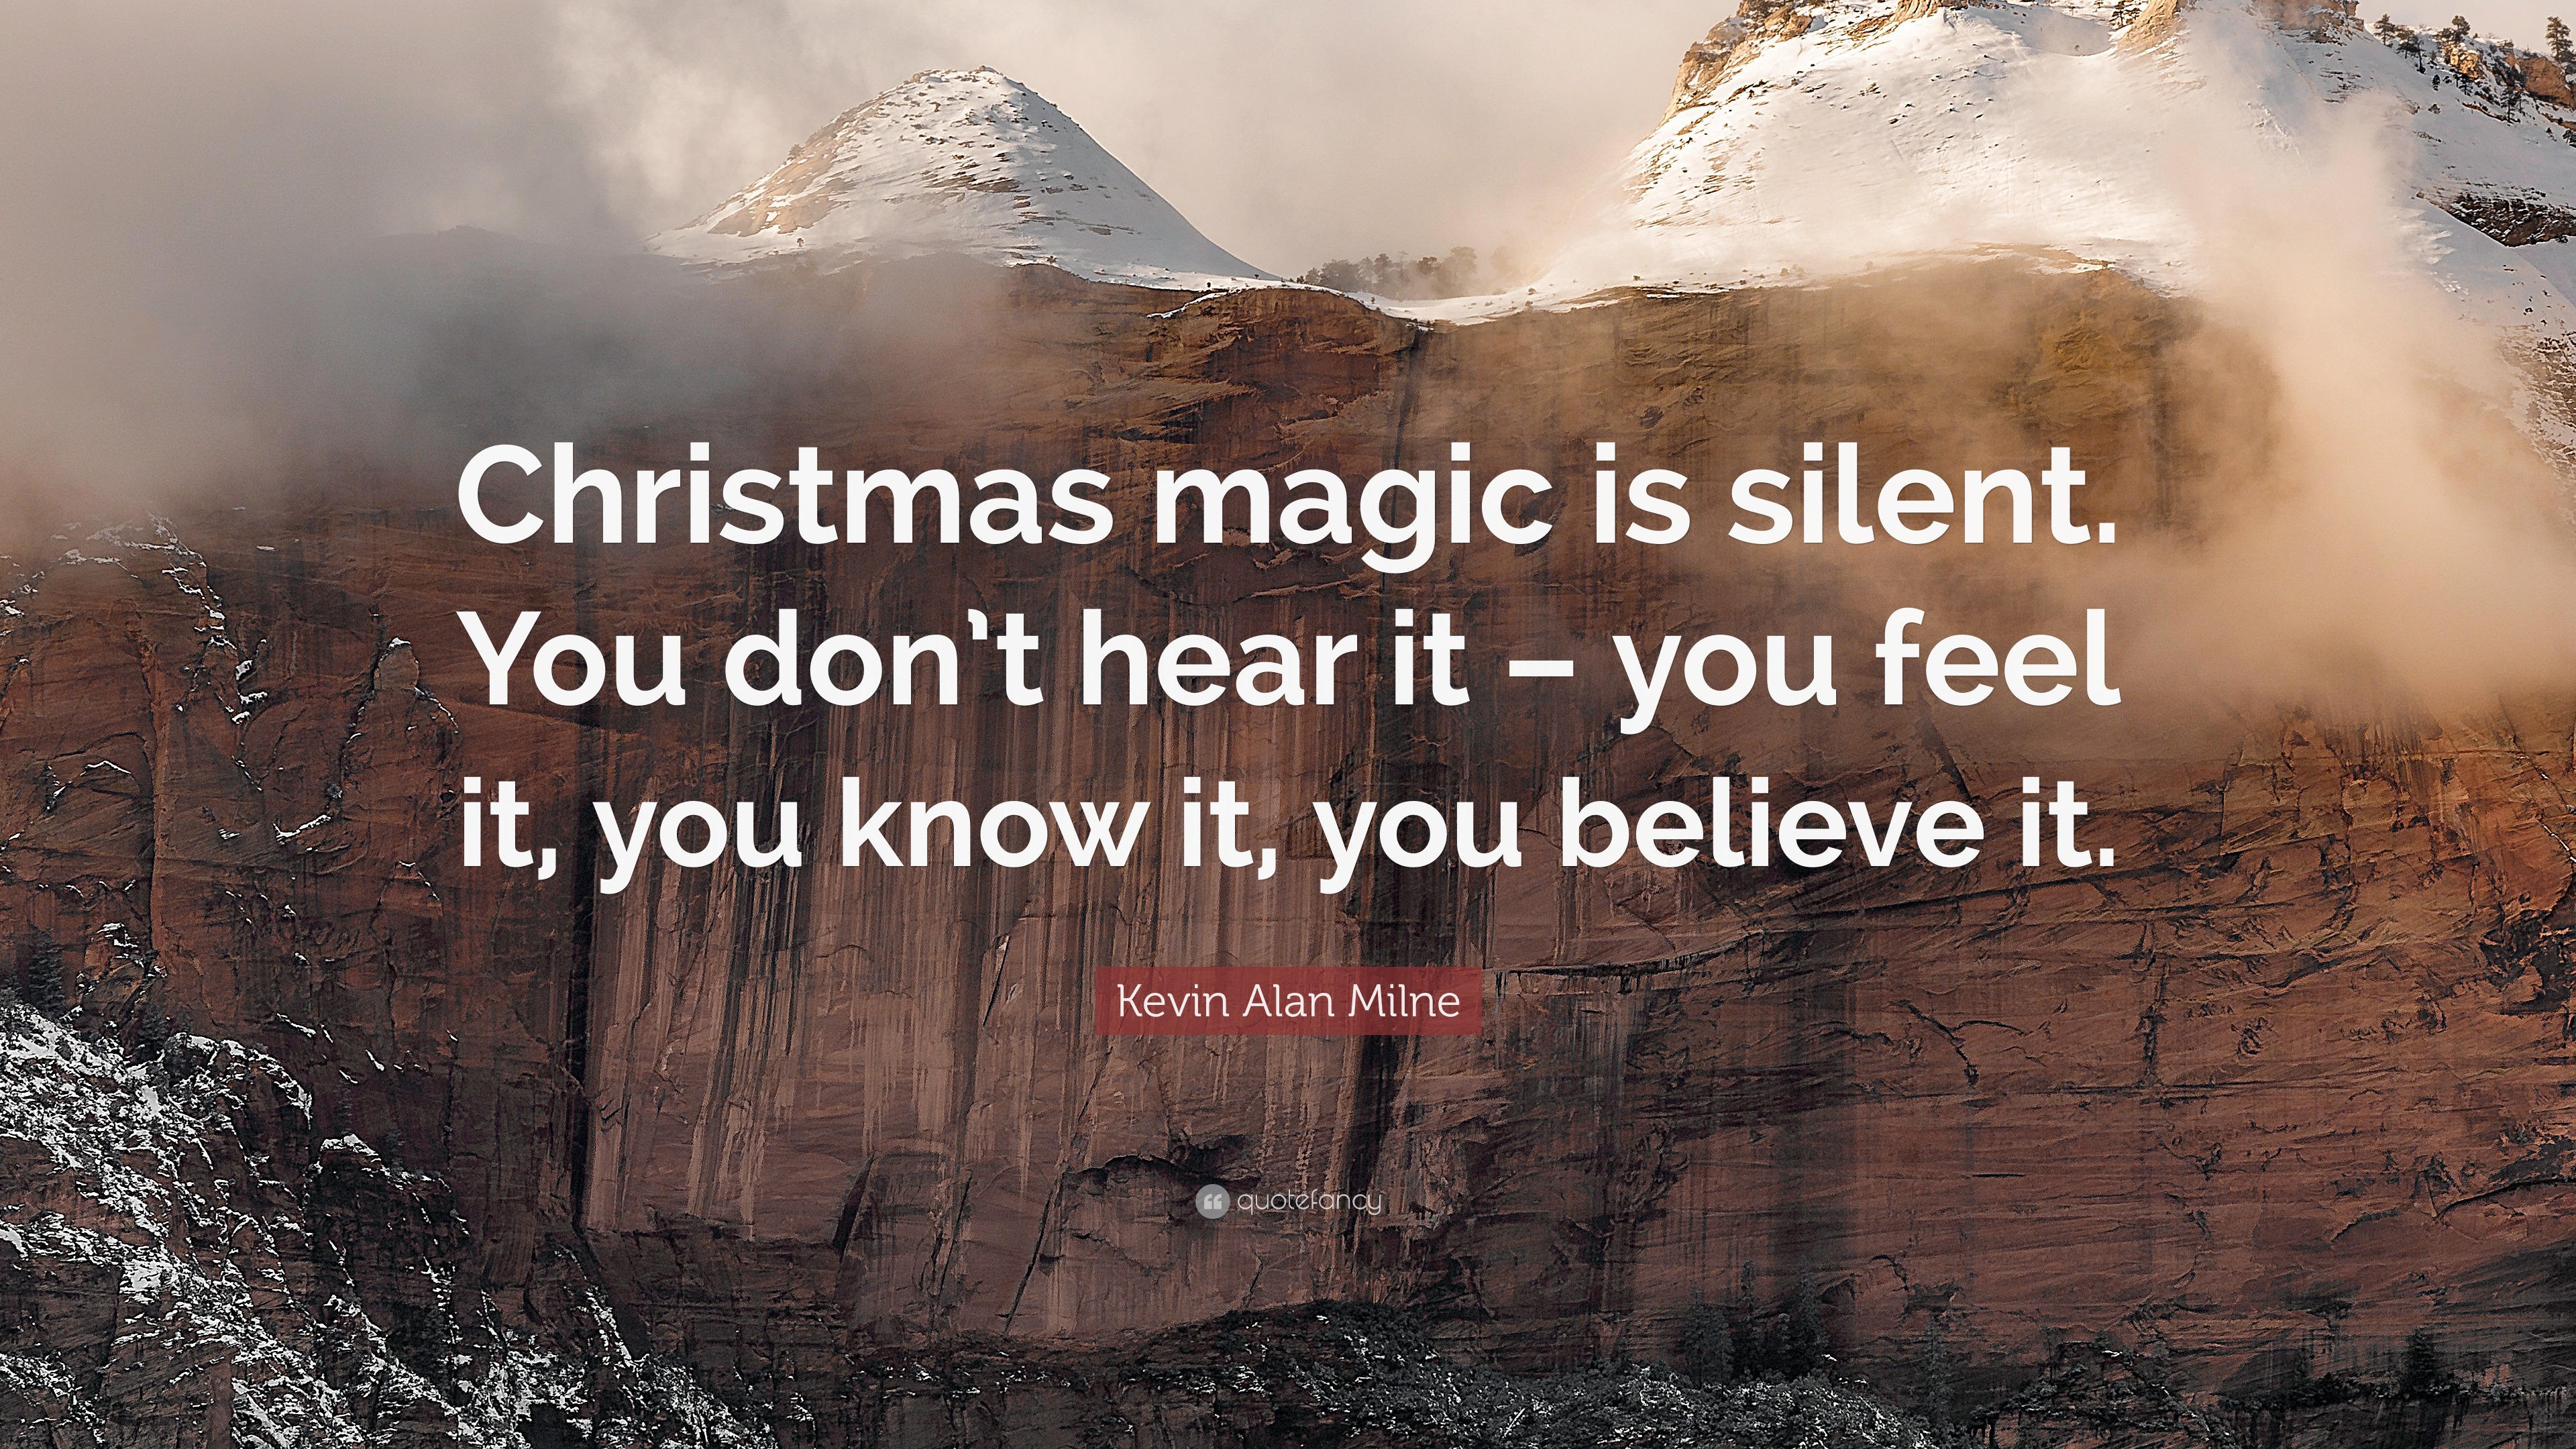 Kevin Alan Milne Quote: “Christmas magic is silent. You don’t hear it ...